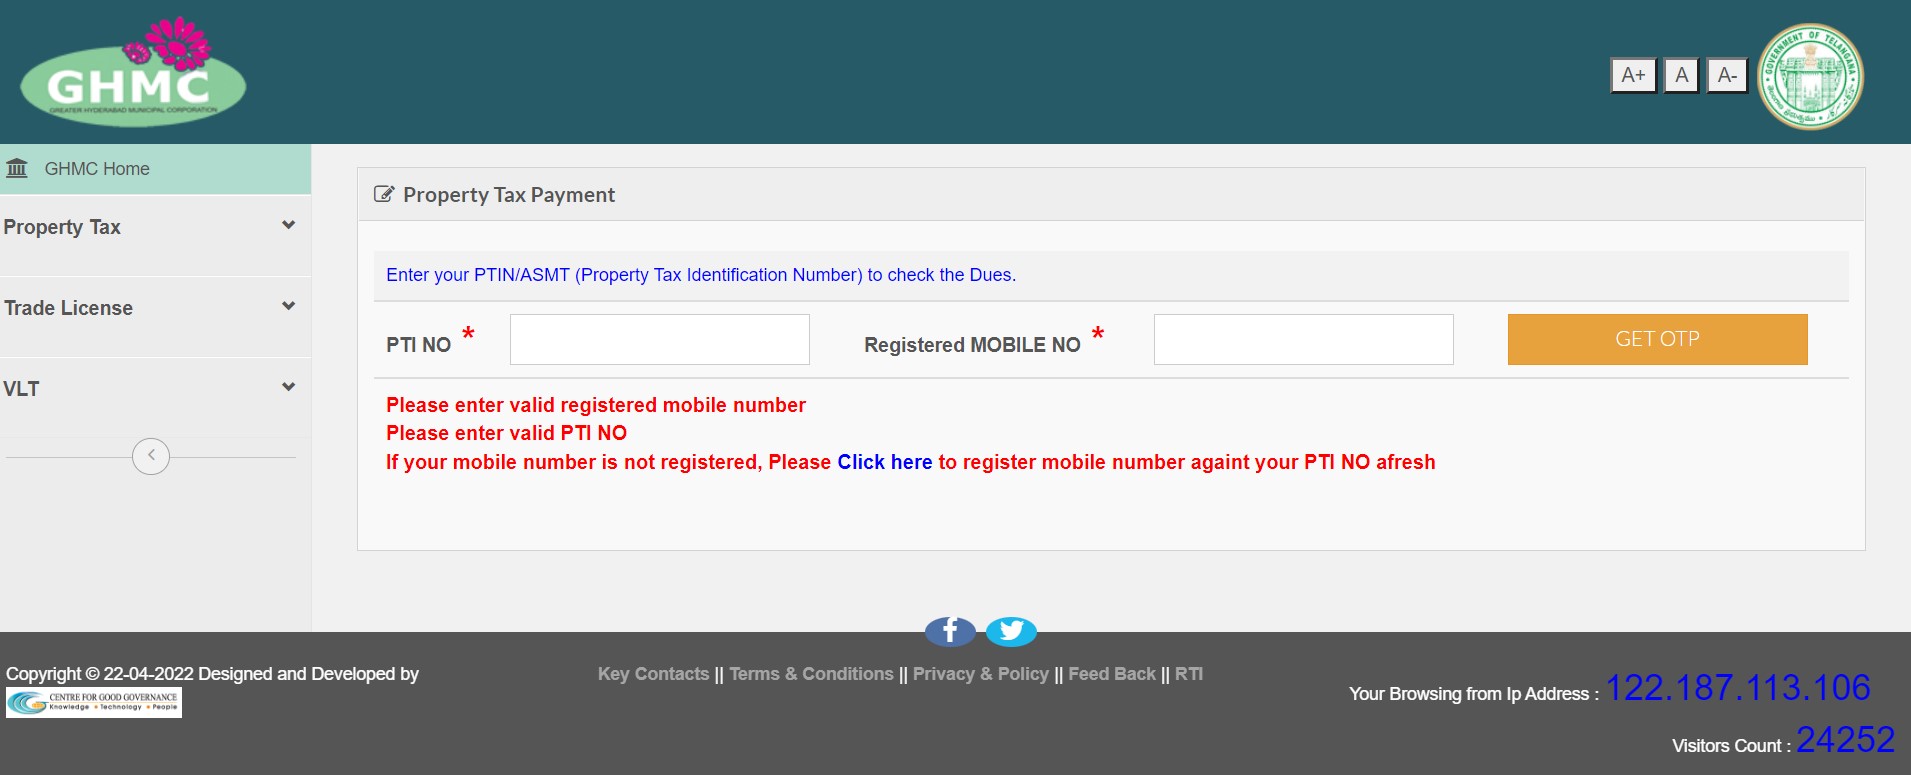 ghmc-property-tax-hyderabad-calculation-payment-penalty